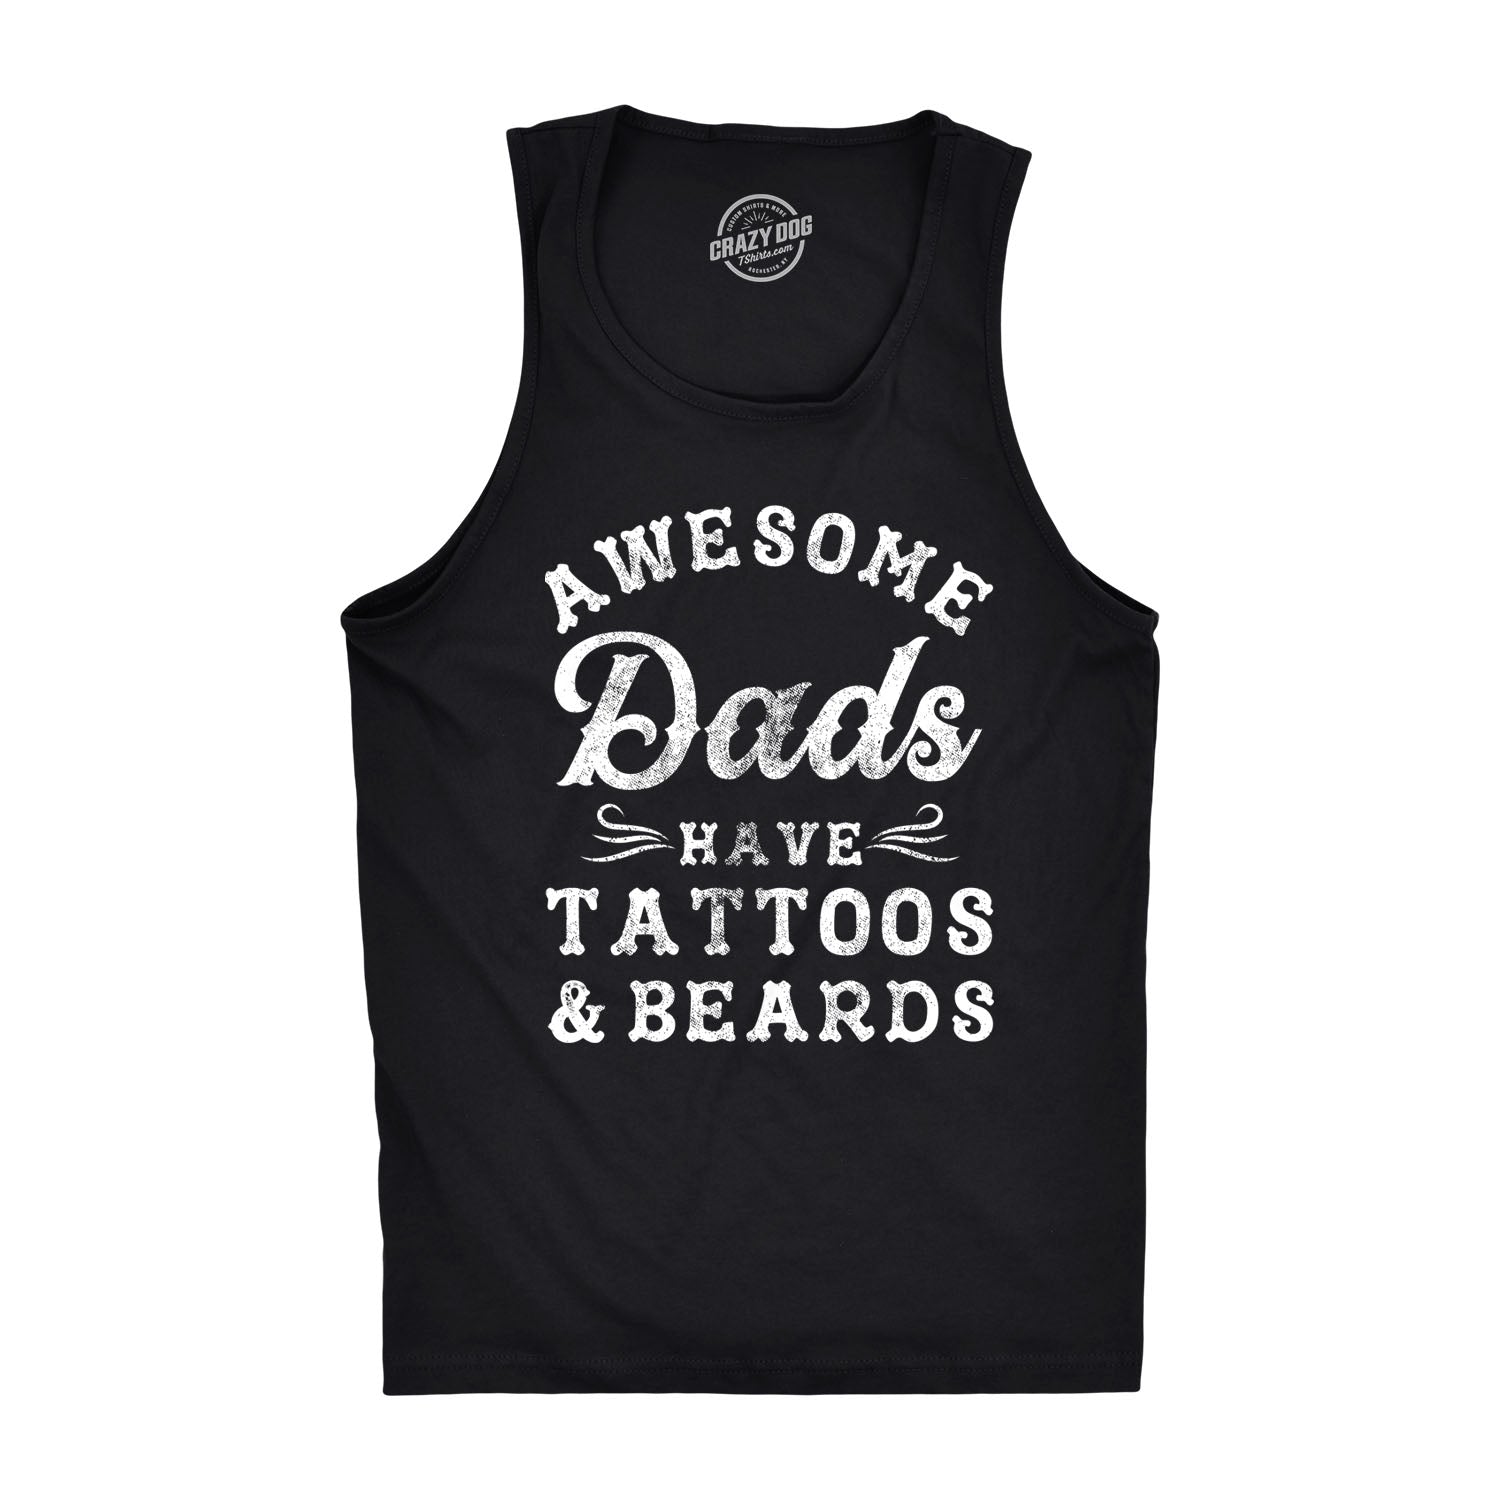 Funny Black Awesome Dads Have Tattoos And Beards Mens Tank Top Nerdy Father's Day Tee